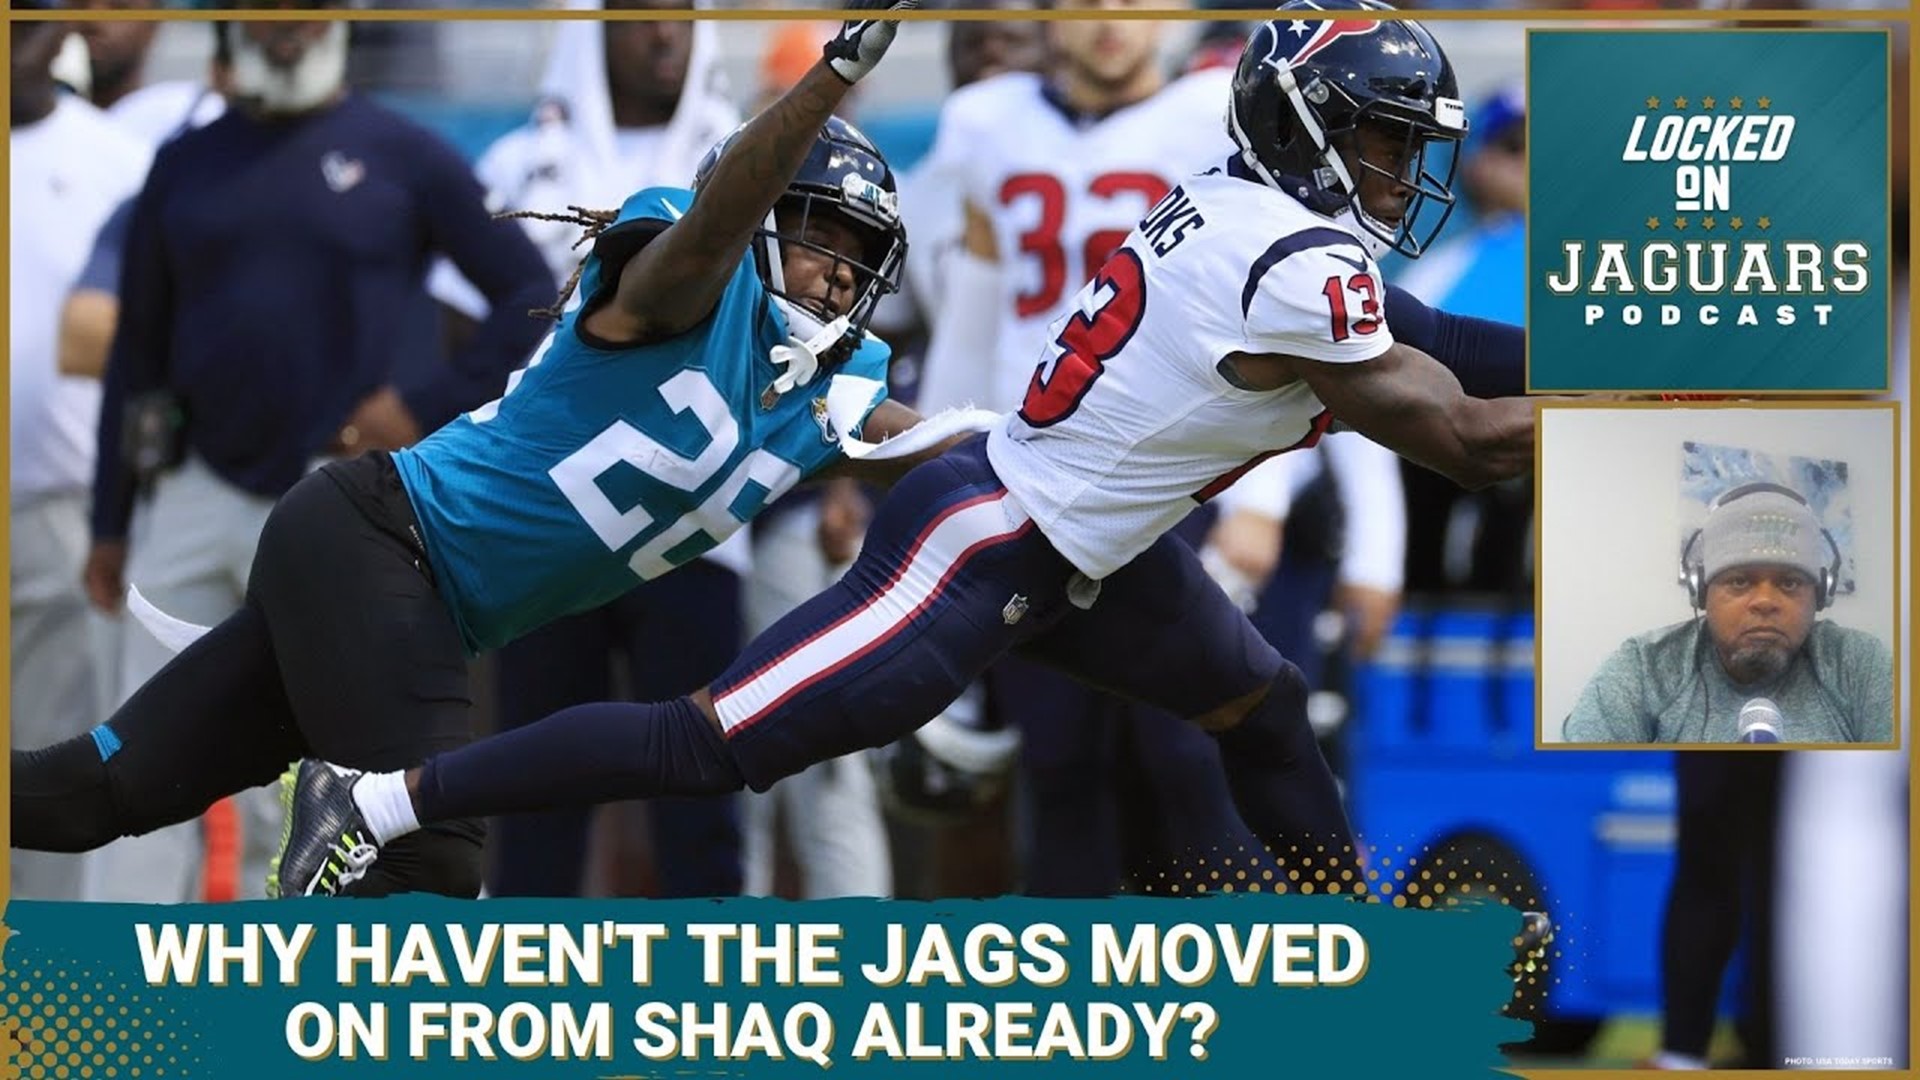 The Jacksonville Jaguars were expected to move on from CB Shaq Griffin and free up over 13 million dollars in salary cap space. So why haven't they?